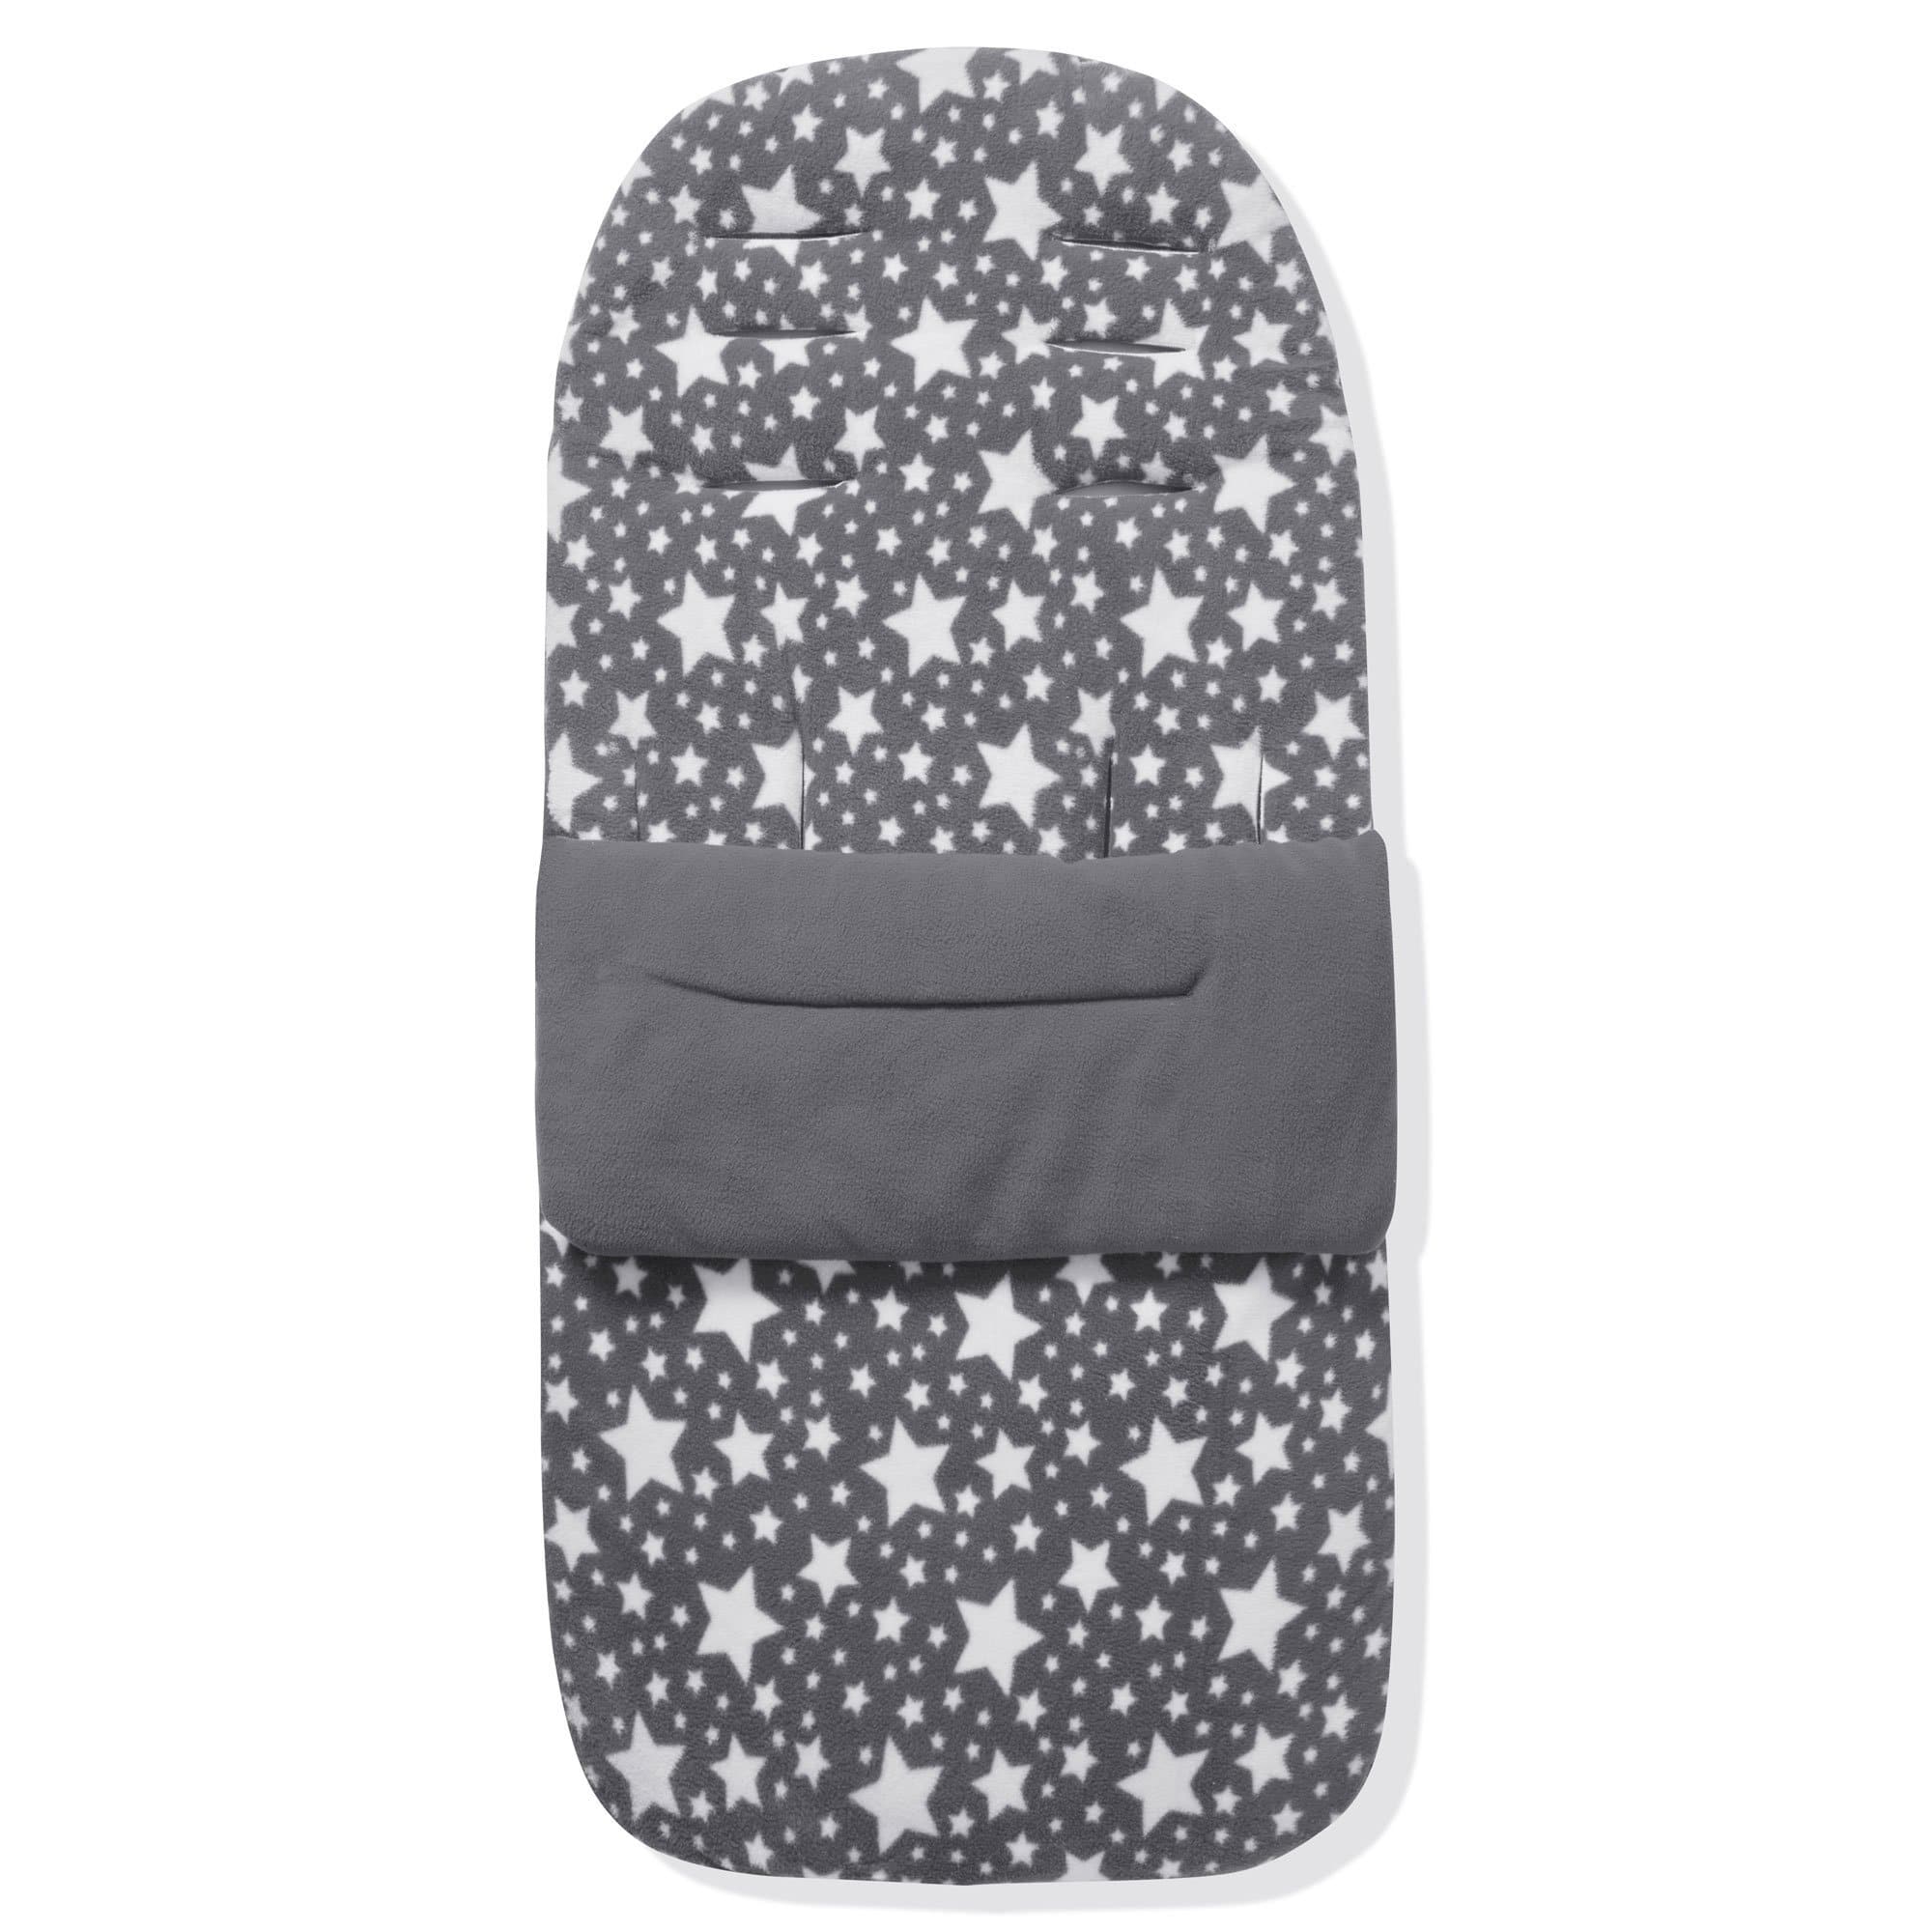 Fleece Footmuff / Cosy Toes Compatible with Stokke - Grey Star / Fits All Models | For Your Little One